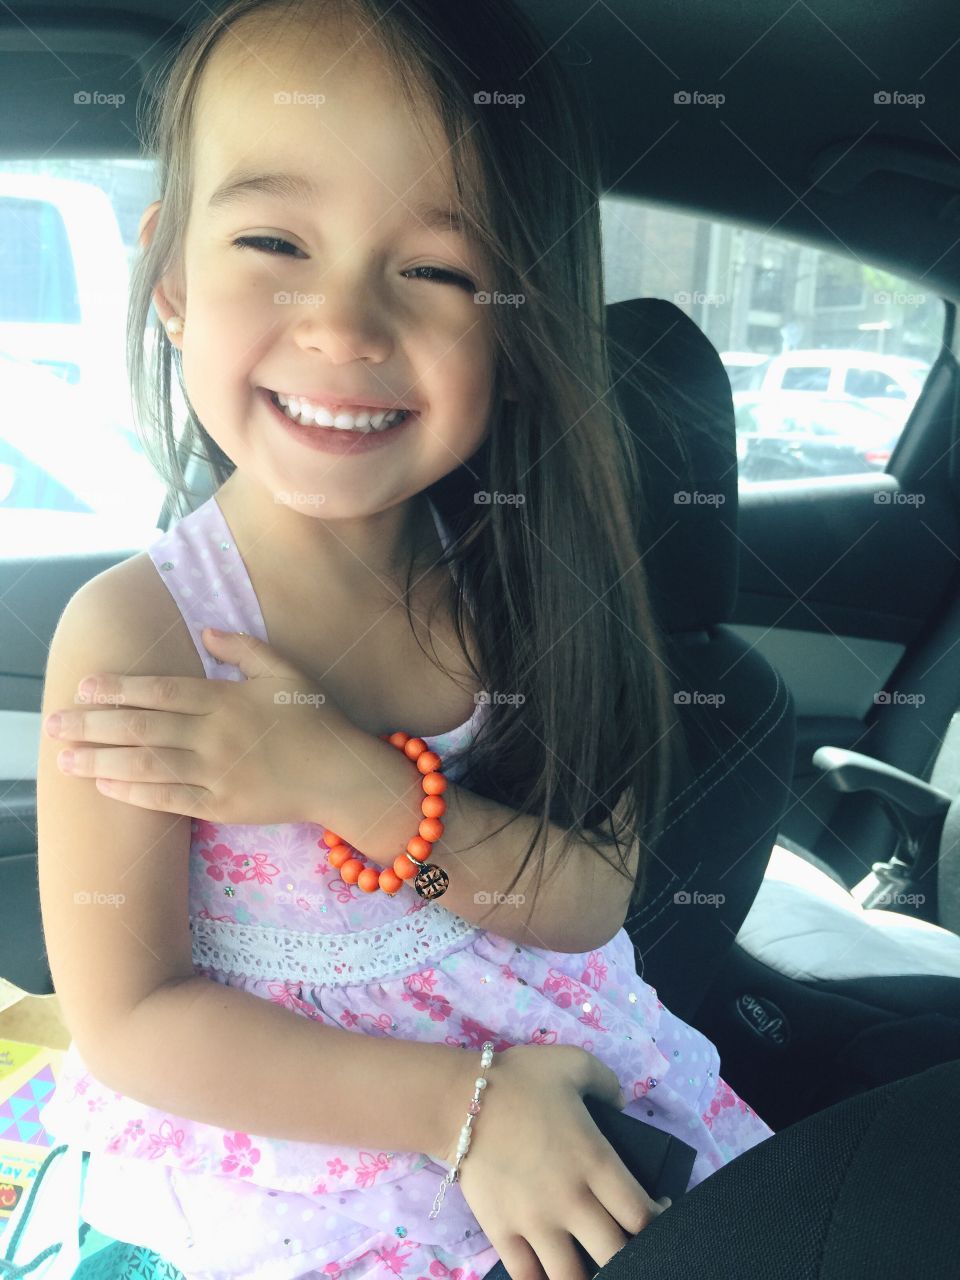 New Bracelet. . Jayda is excited about her new favorite color Rustic Cuff bracelet. 